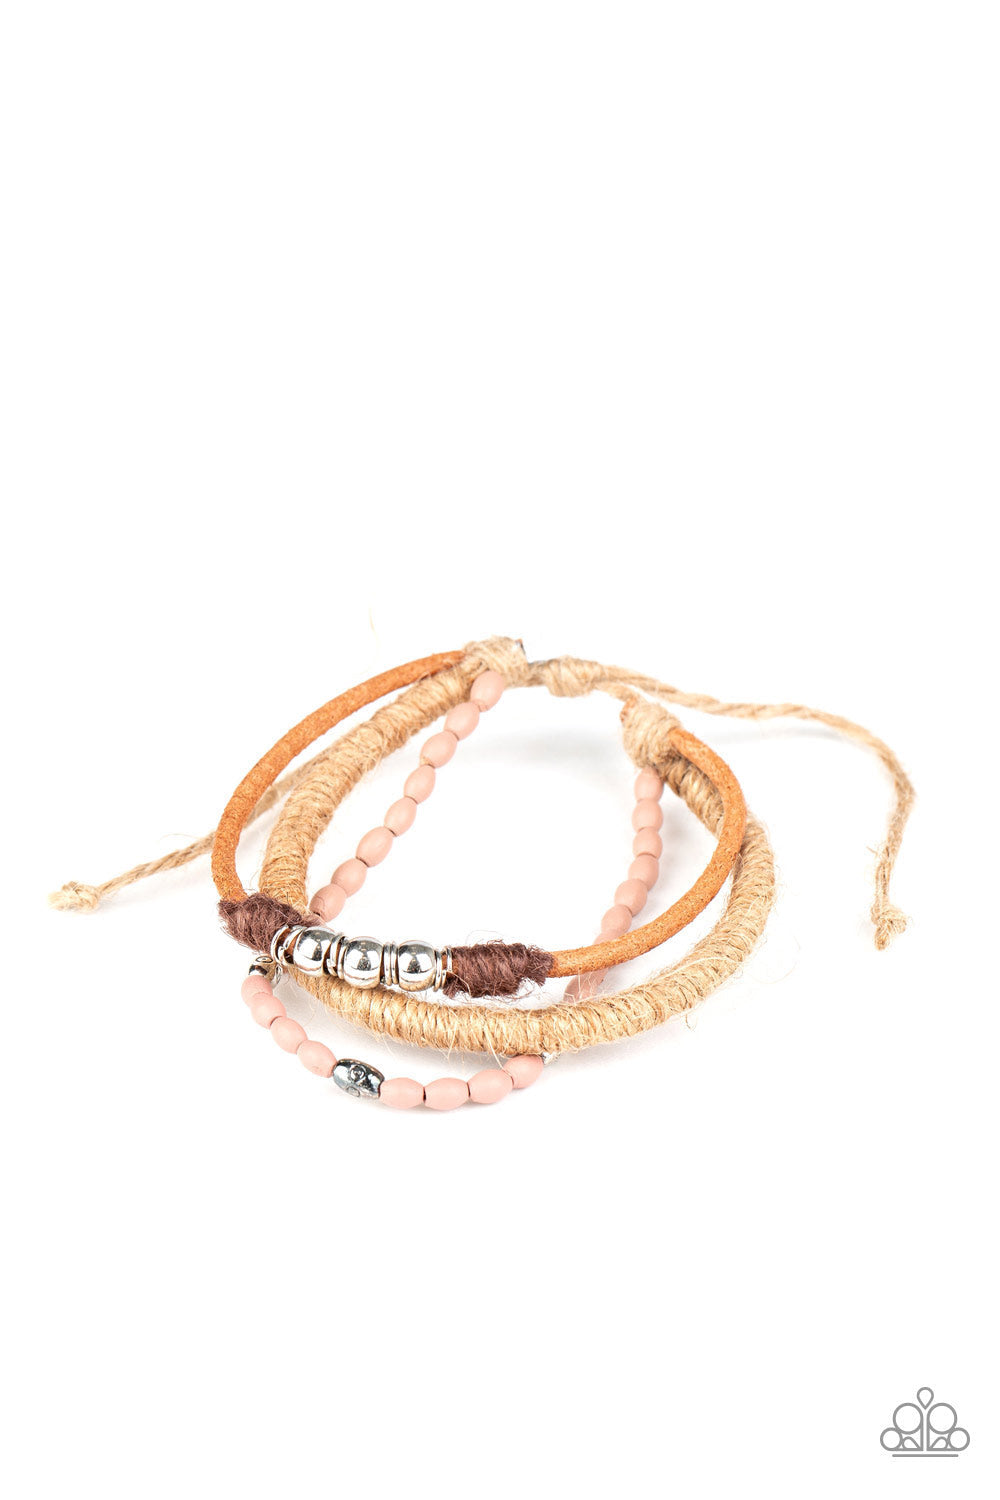 SEA You At The Beach - Multi Color Urban Bracelet - Paparazzi Accessories - Infused with wooden Rose Tan beads and mismatched silver accents, earthy strands of twine and suede cording layer across the wrist for a seasonal flair. Features an adjustable sliding knot closure.